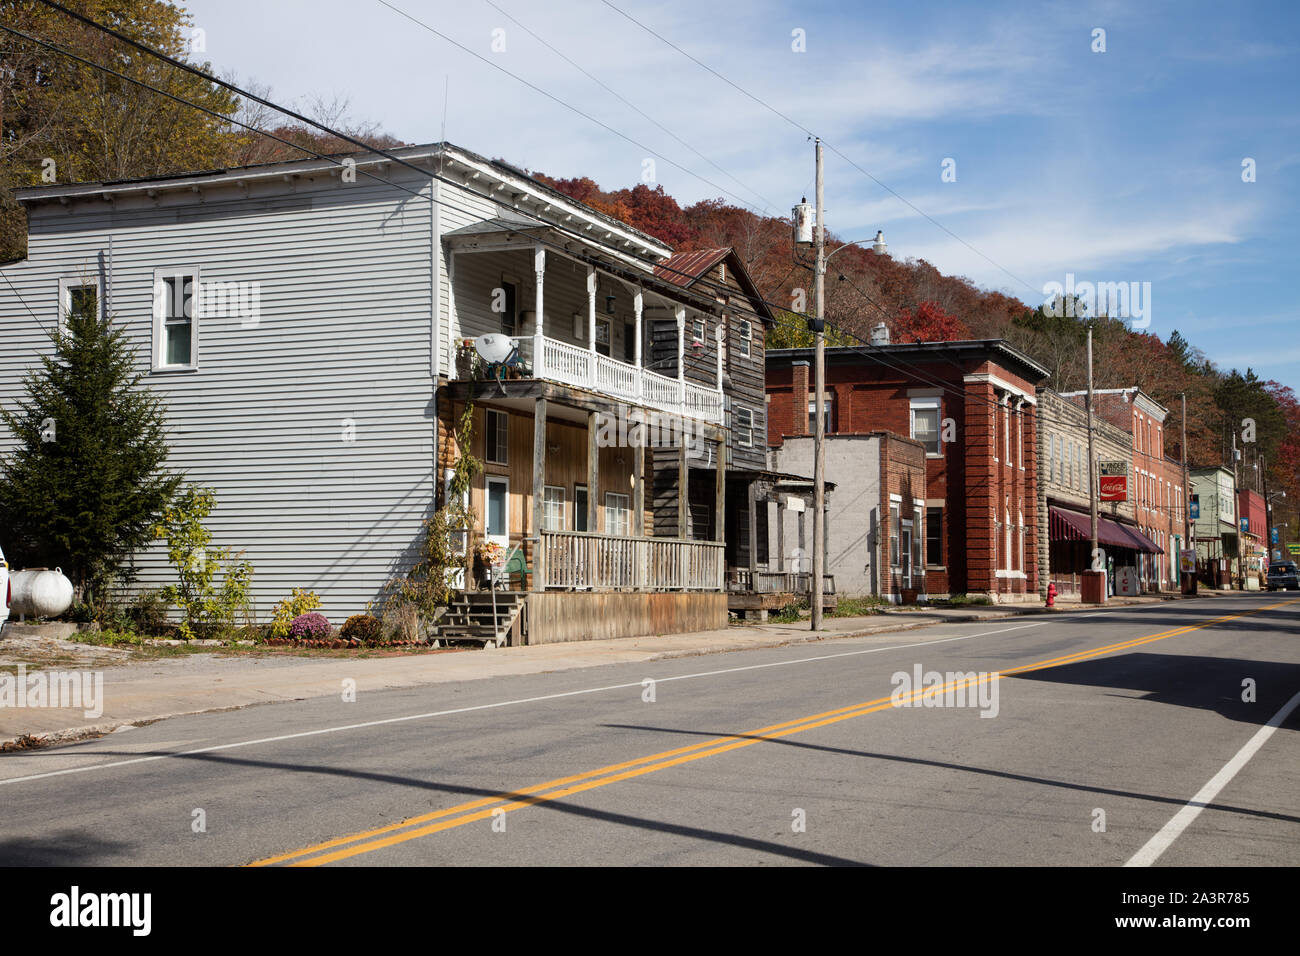 Streetscape in the tiny settlement of Durbin, near the headwaters of the Greenbrier River in Pocahontas County, West Virginia Stock Photo